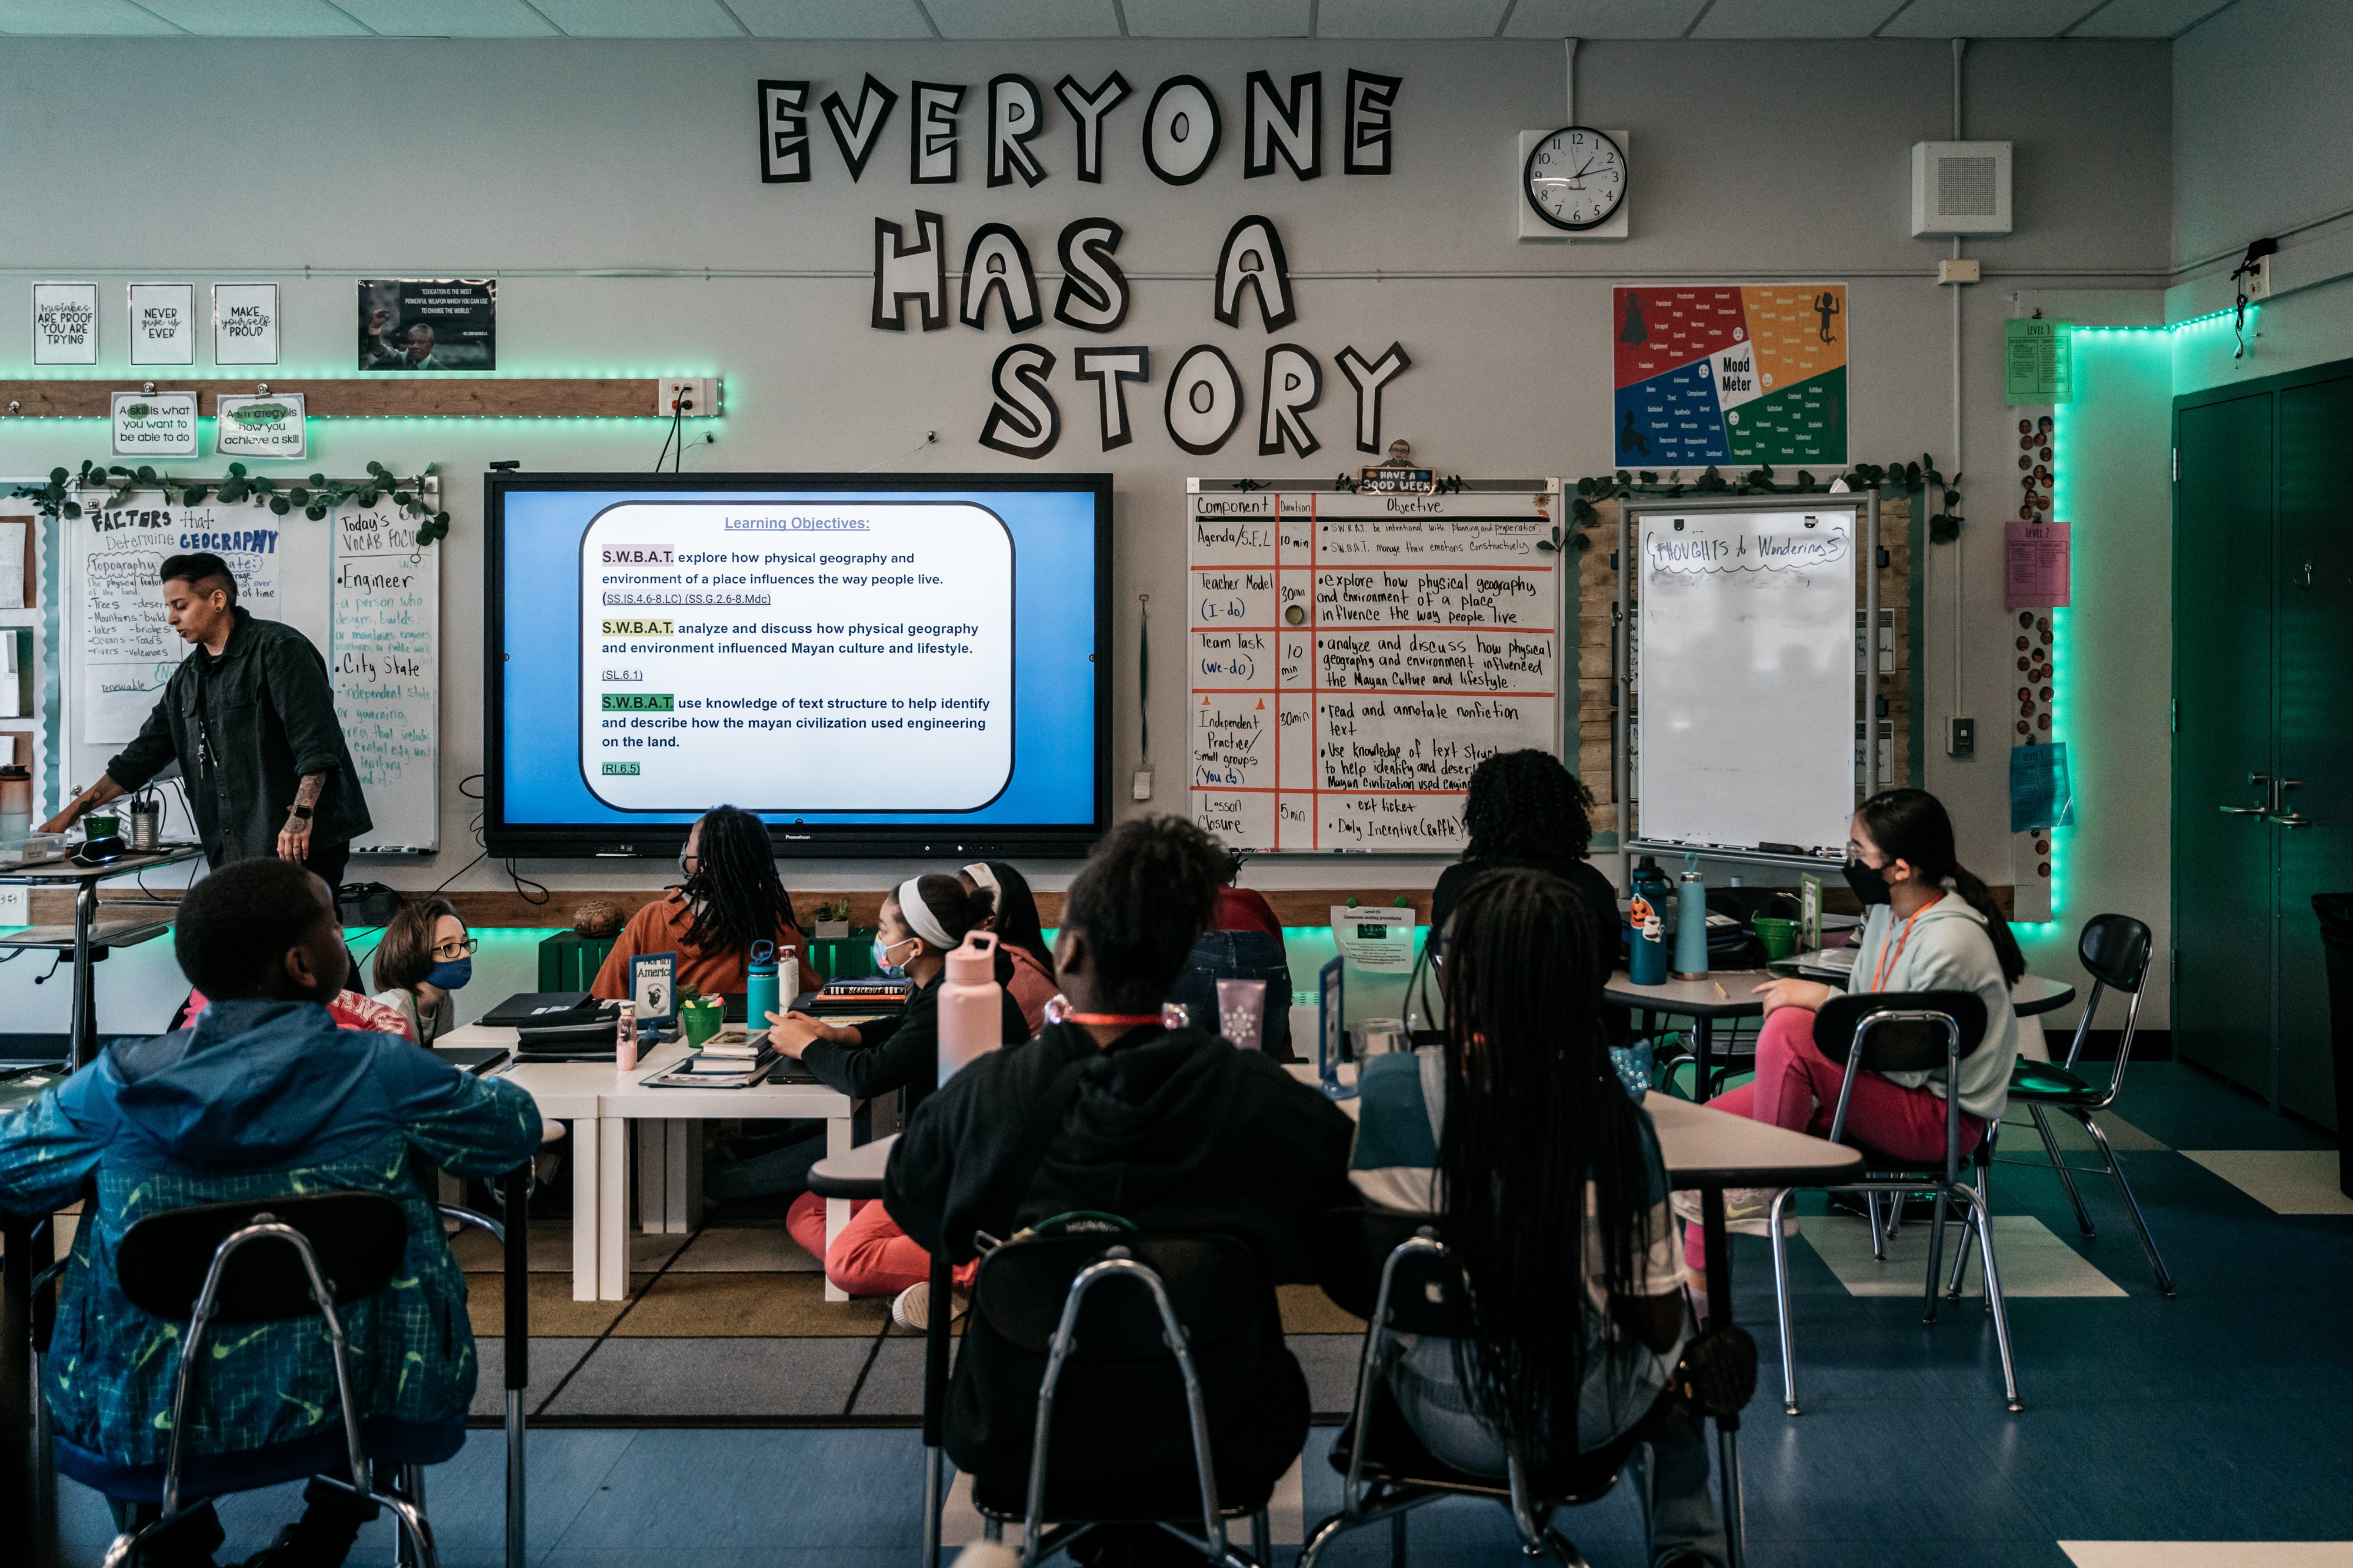 Students look up at their teacher and the lesson projection on the screen. The words “EVERYONE HAS A STORY” hang high on the classroom wall.